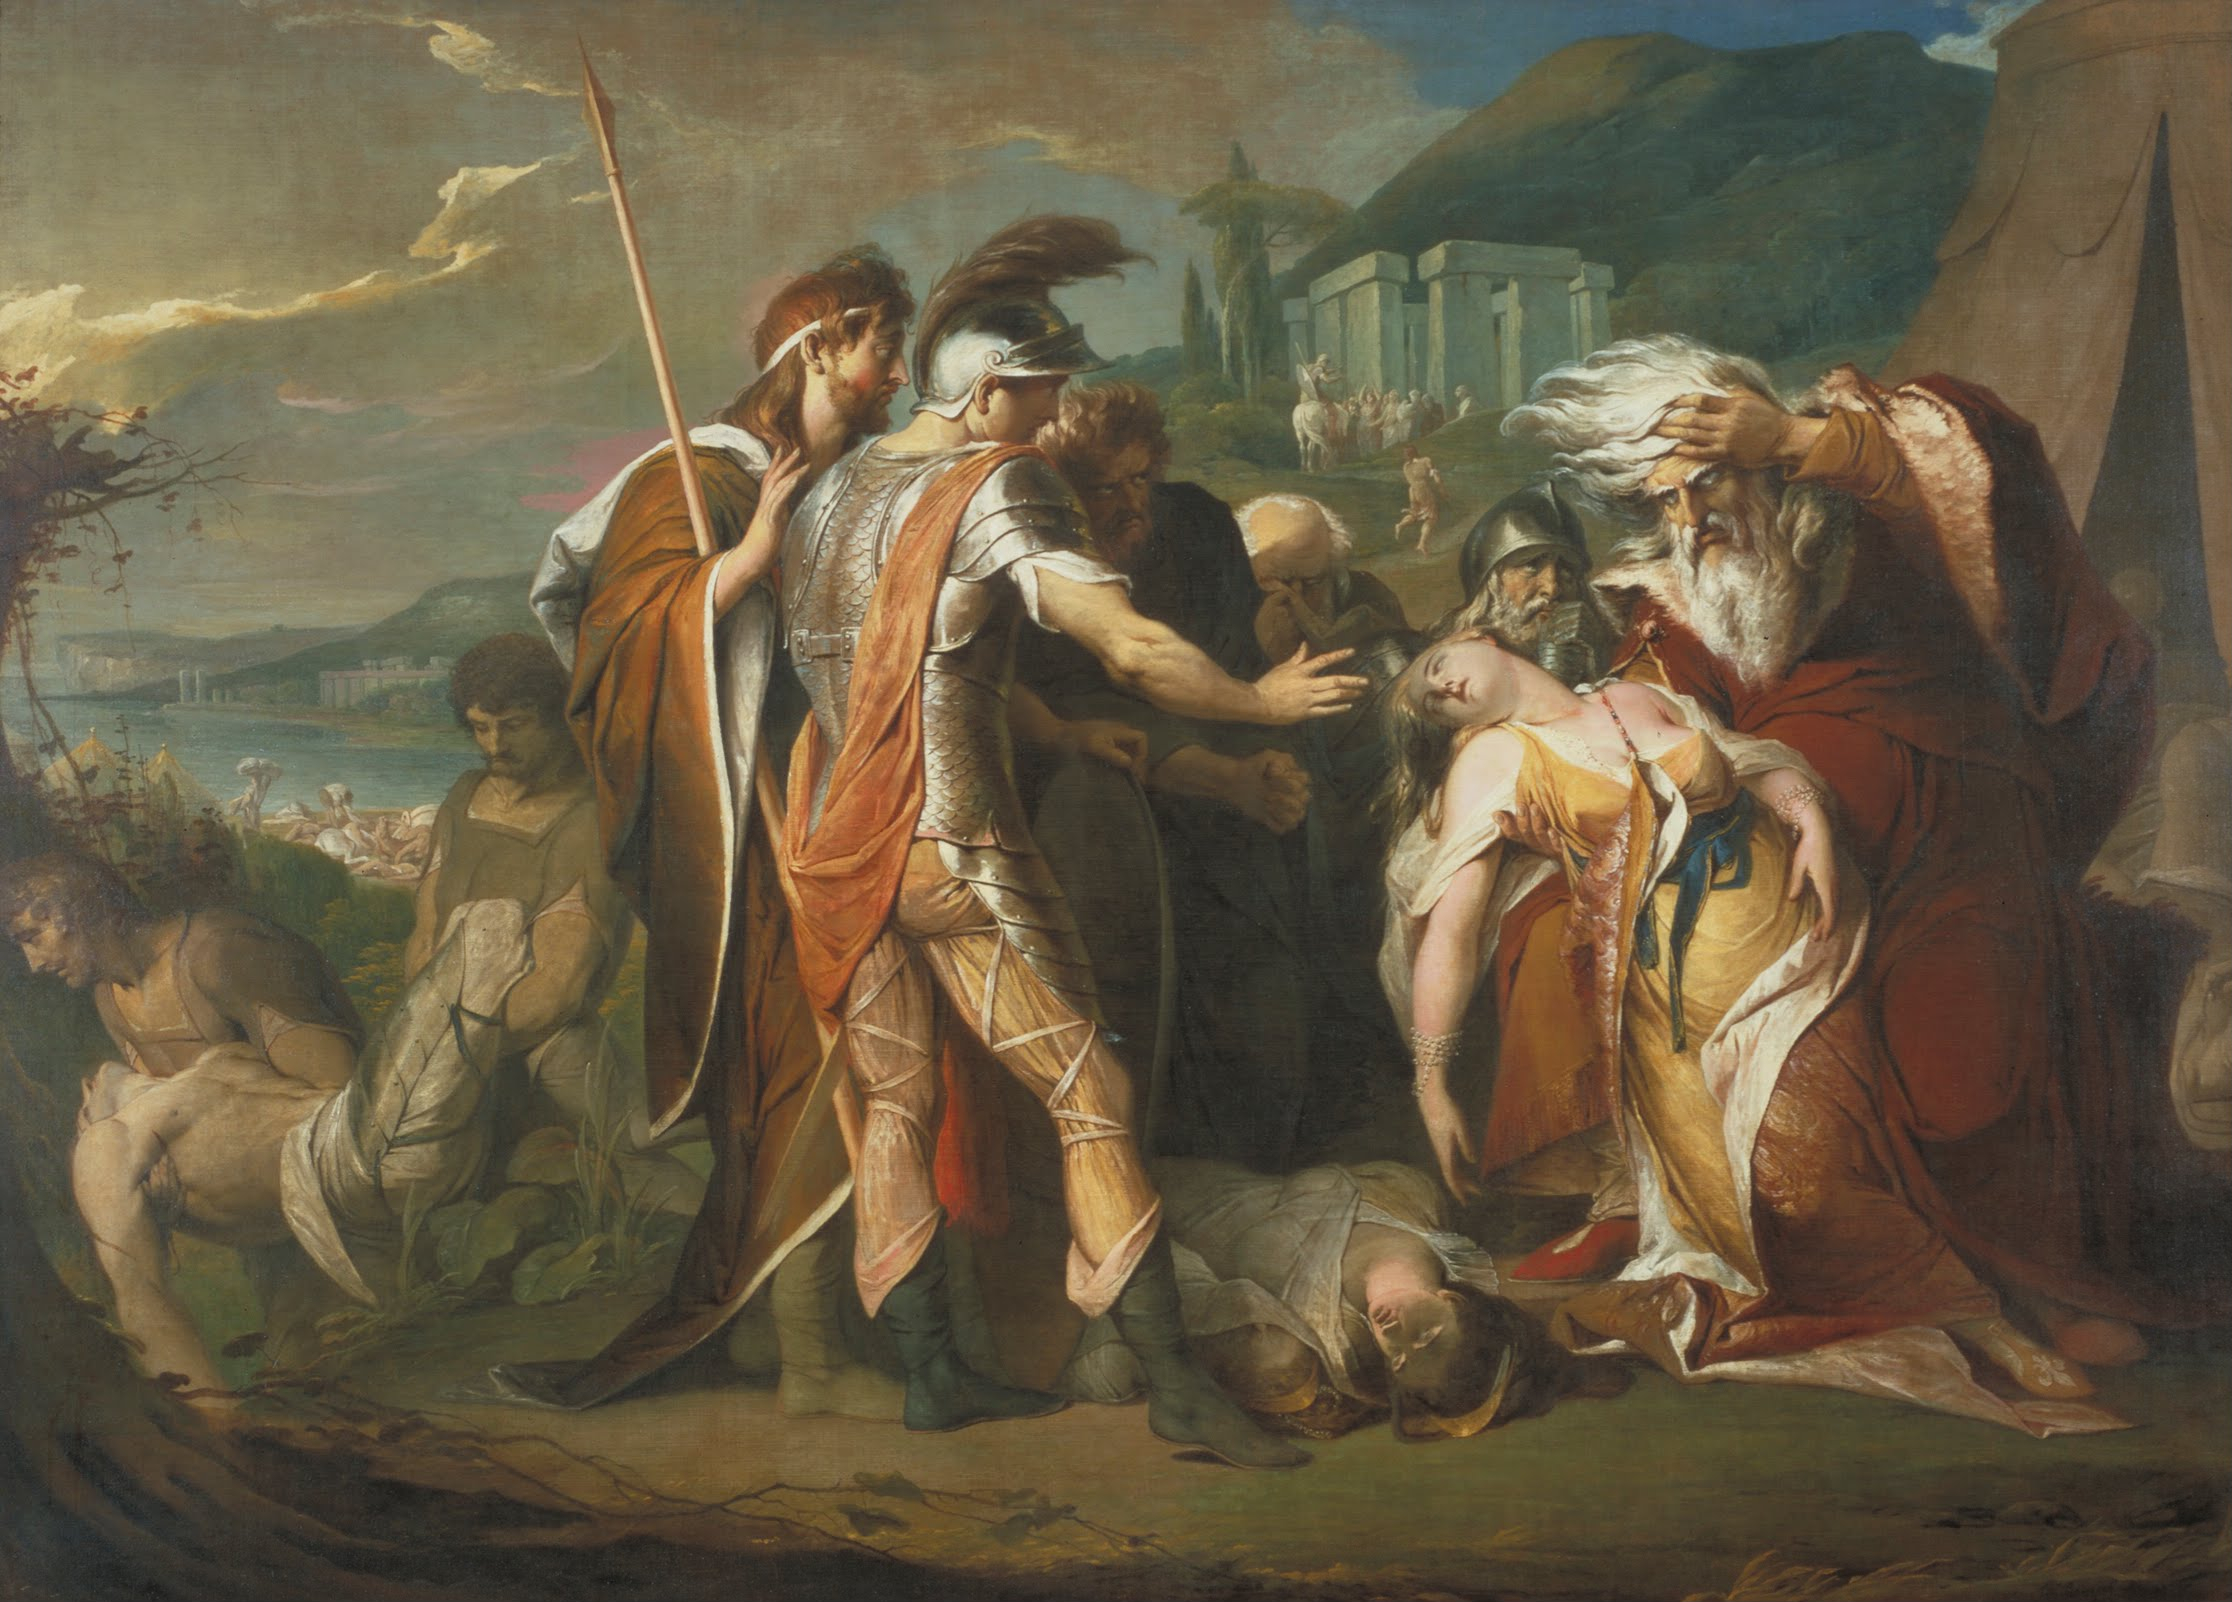 James Barry   King Lear Weeping over the Dead Body of Cordelia